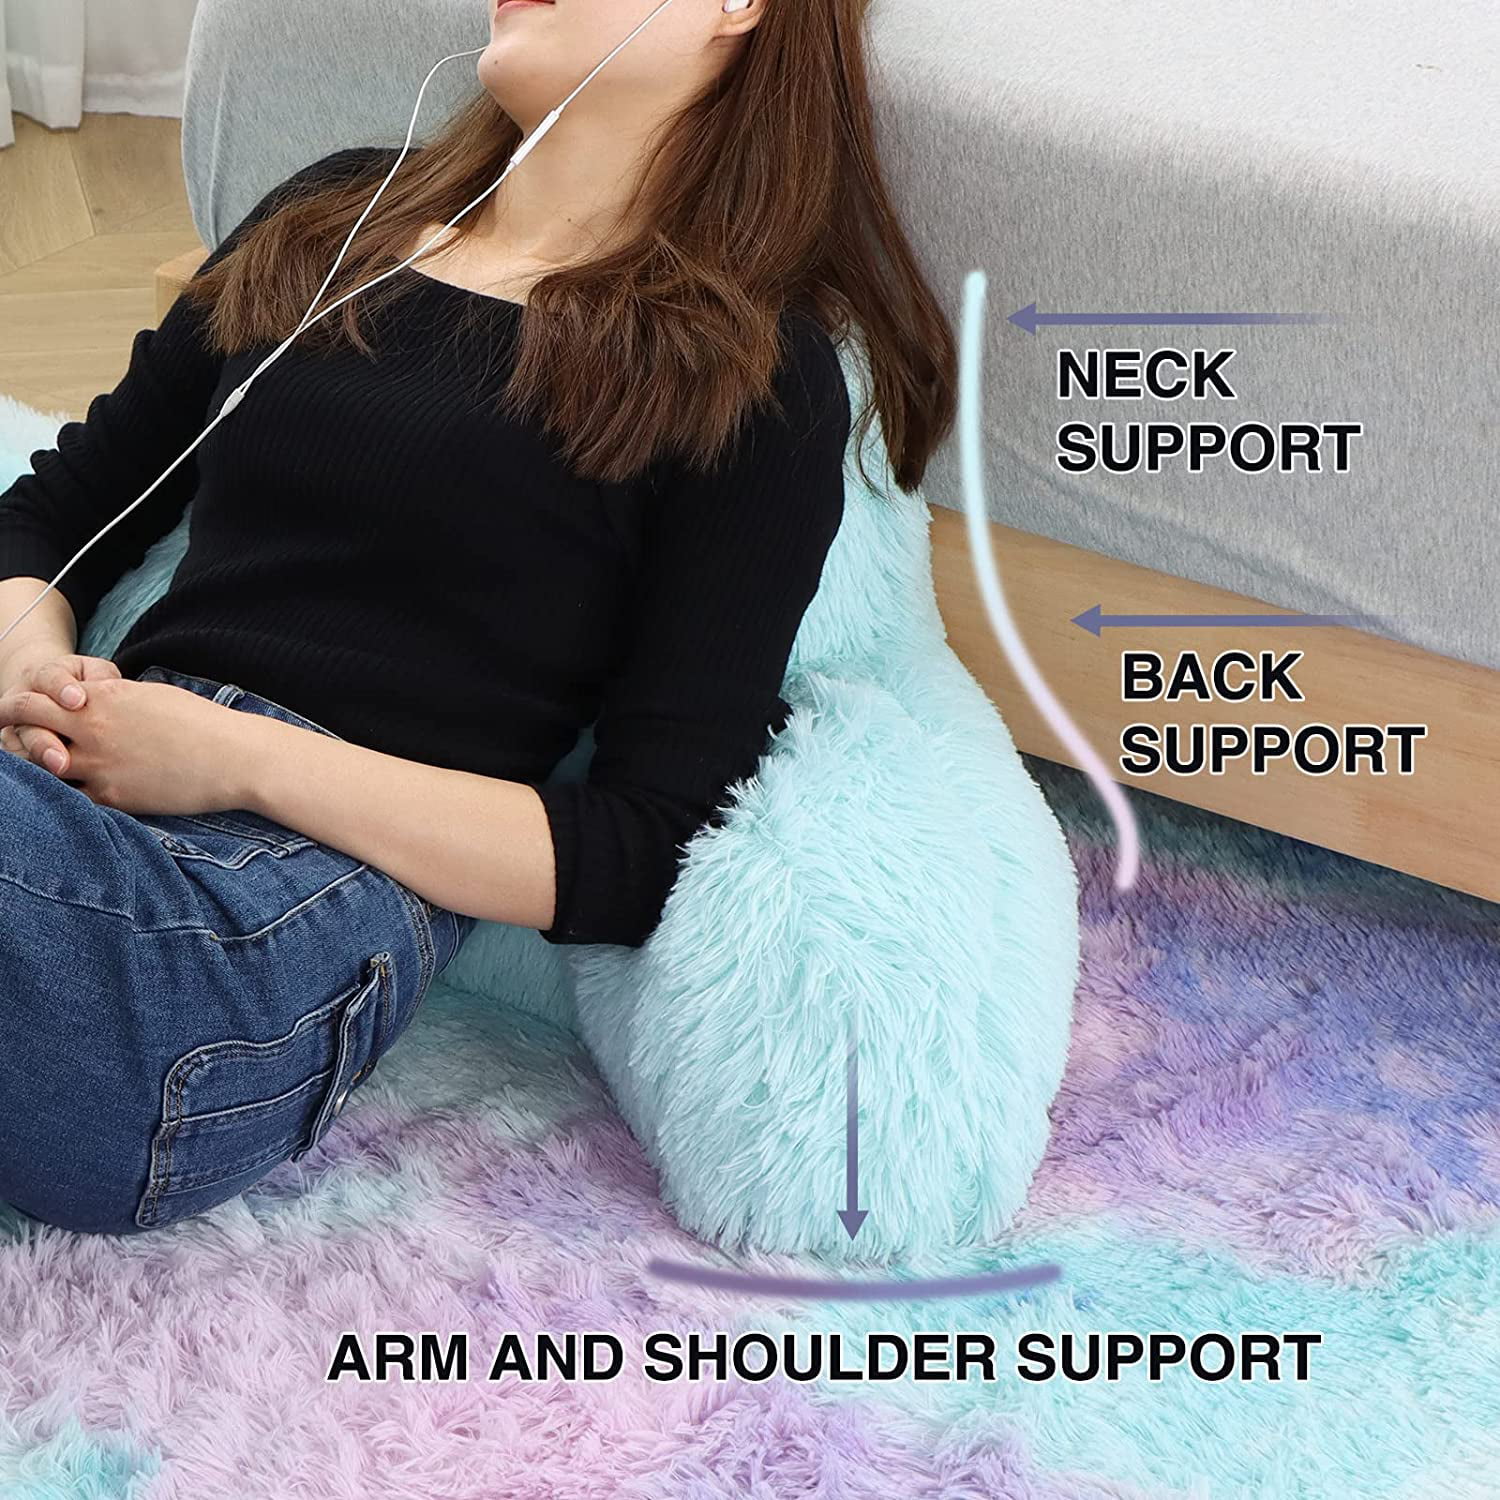  Hobed Life Faux Fur Backrest Pillow for Kids, Teen Reading  Pillow with Arms, Fluffy Back Support Pillow for Sitting Up in Bed/Couch,  Bed Wedge Pillow for Girls, Reading & Bed Rest